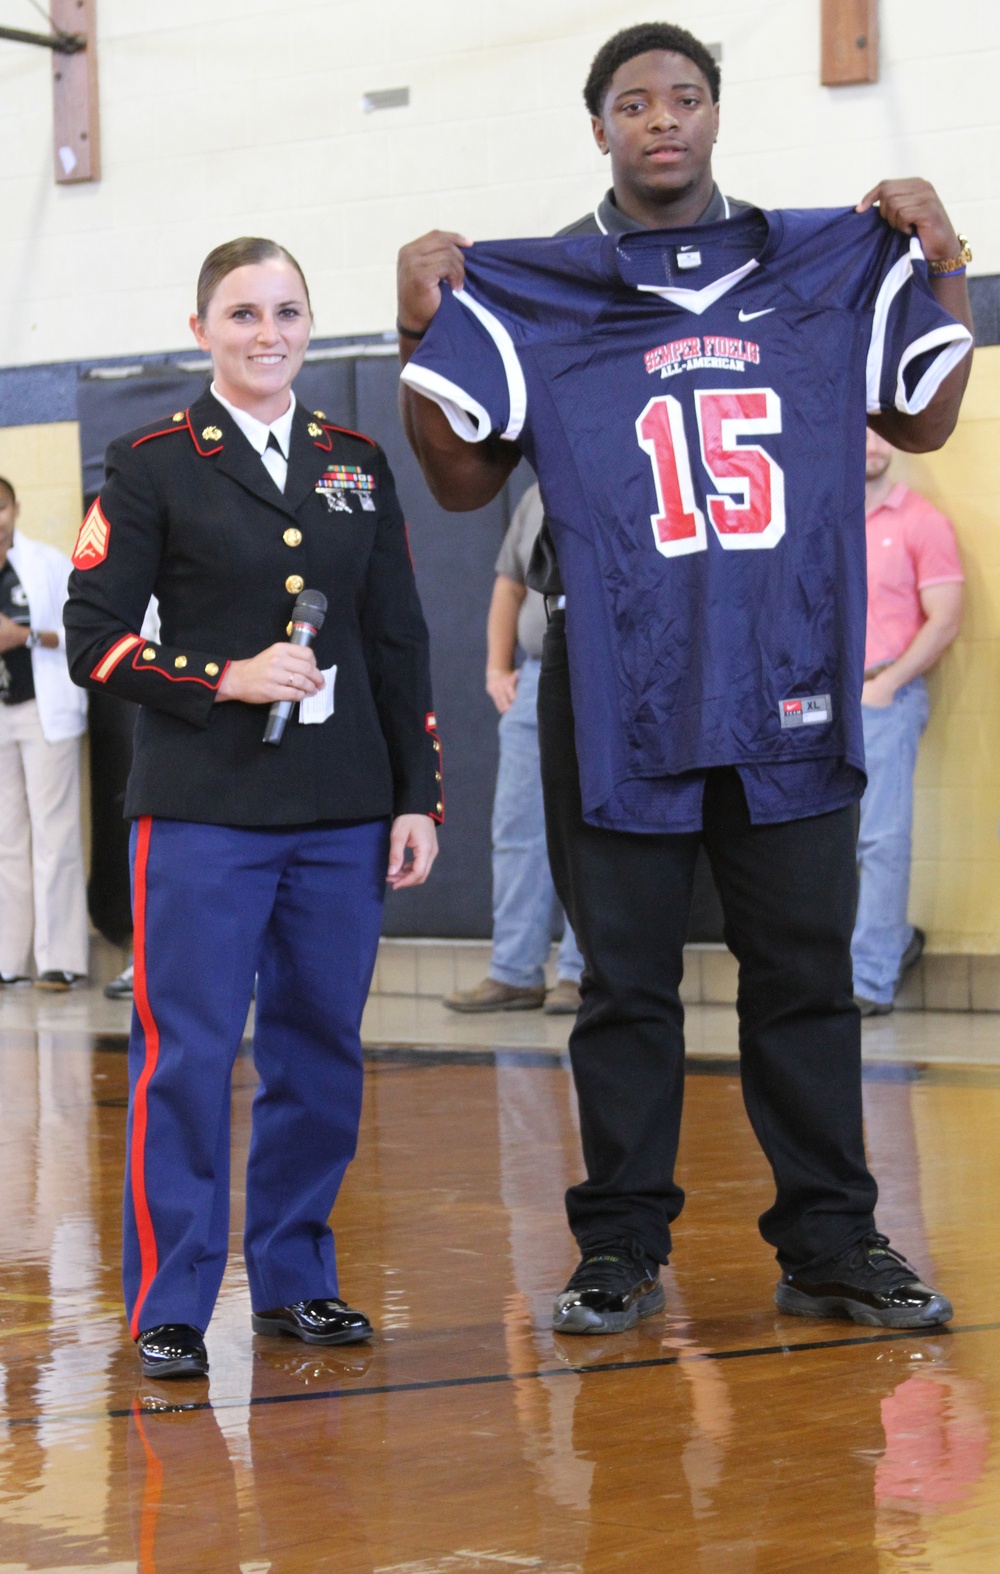 Dadeville student selected for national bowl game